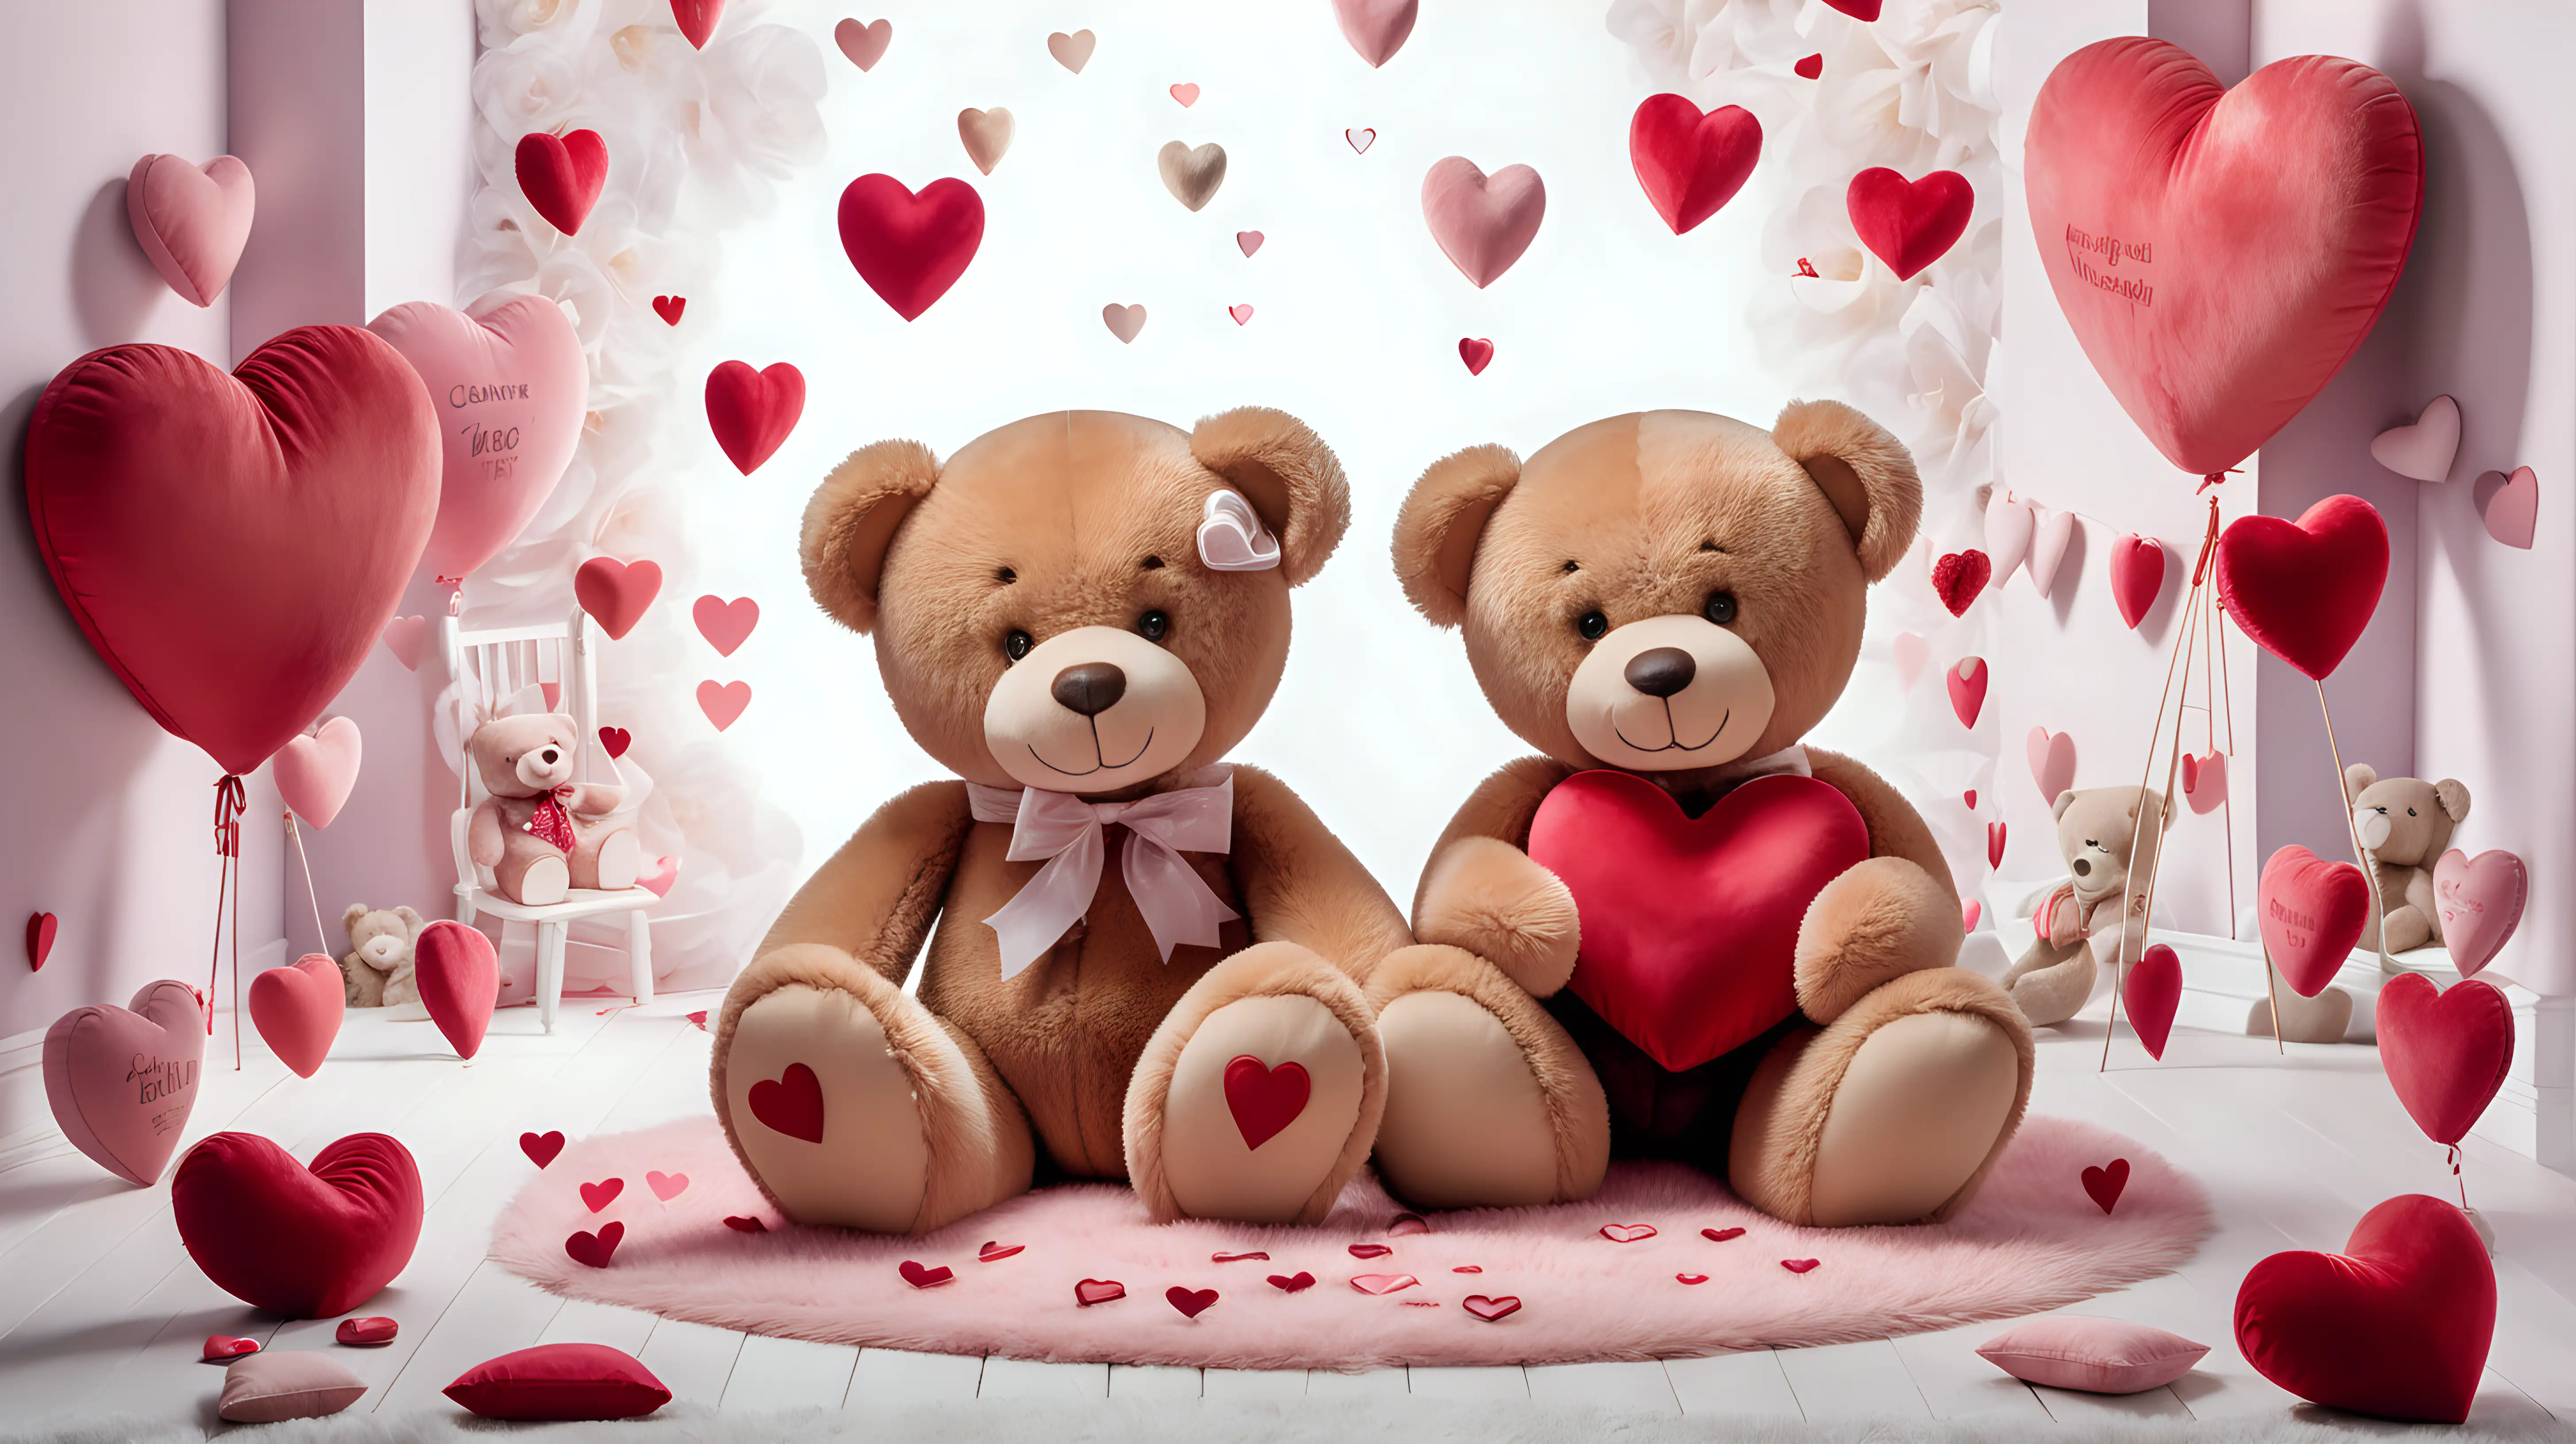 A void surrounded by a delightful array of hearts and cuddly teddy bears, providing a canvas for your expressions of love.